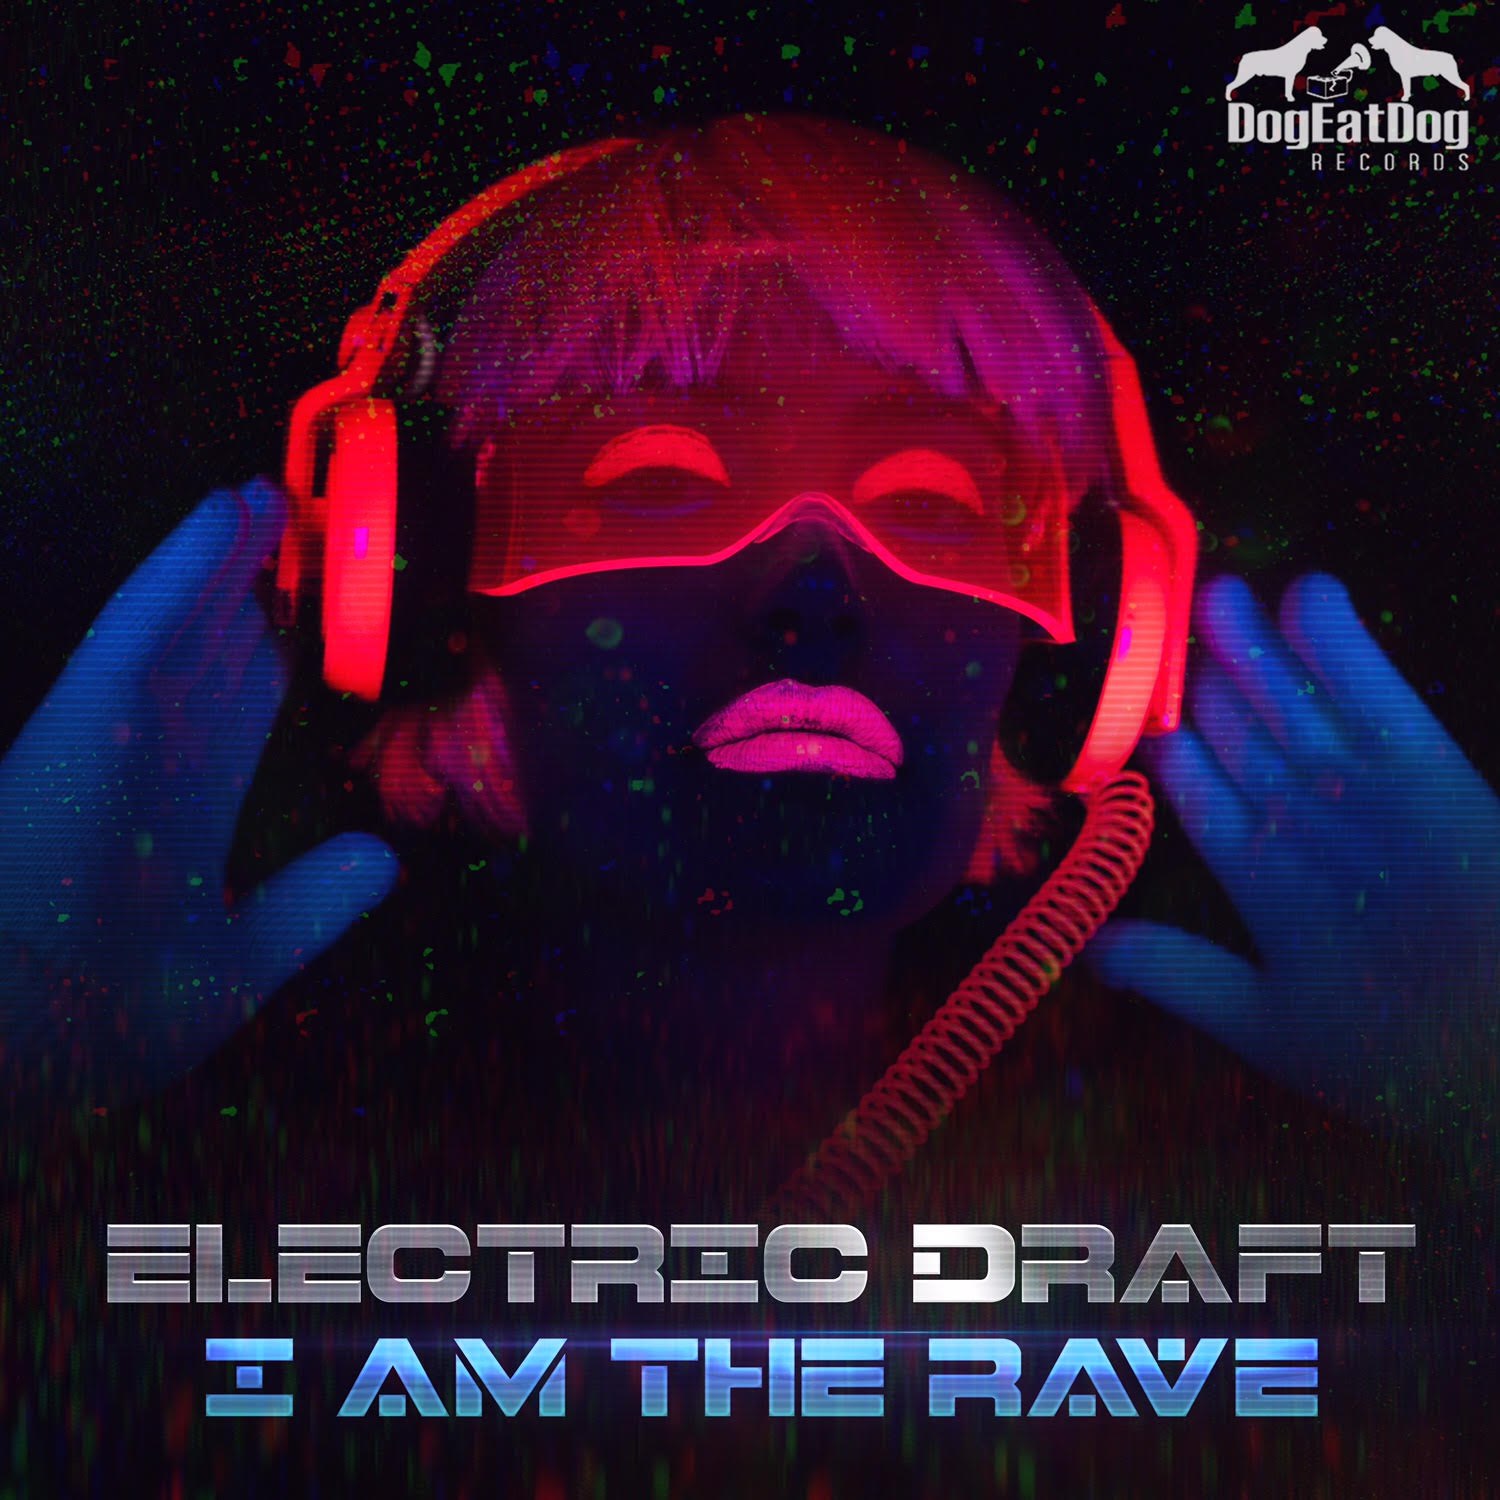 I am the rave